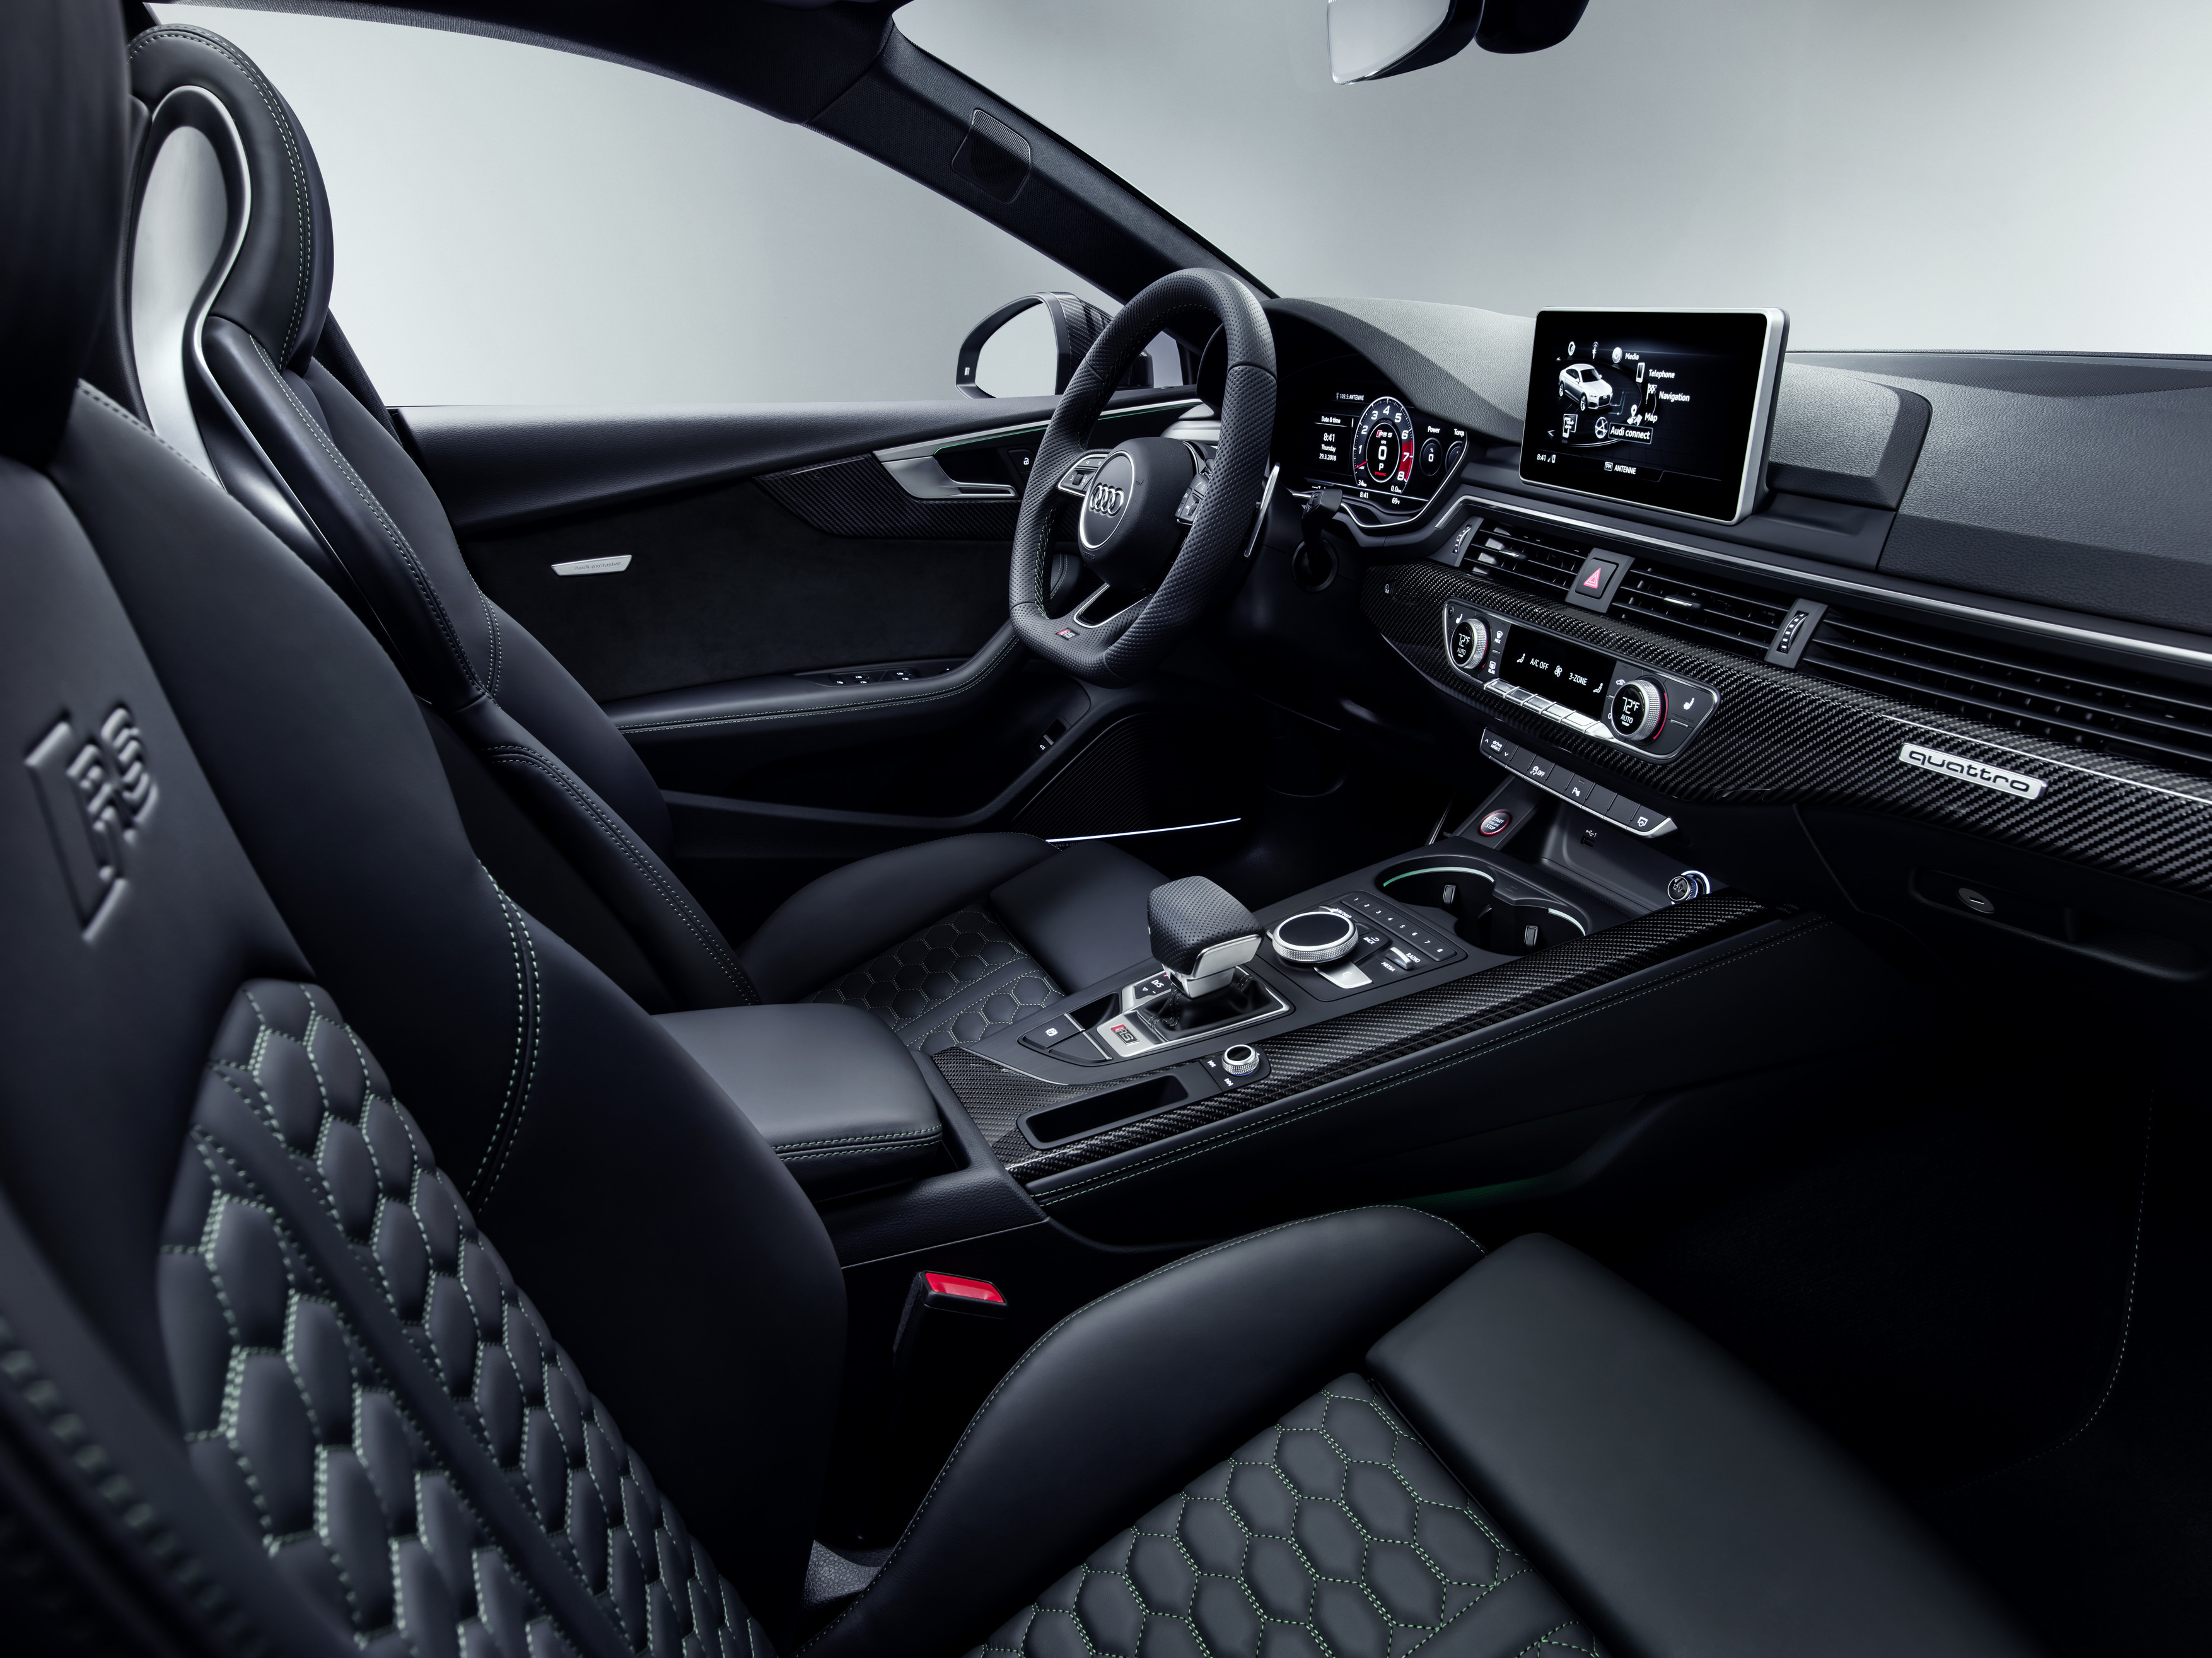 Audi RS 5 Sportback interior specifications